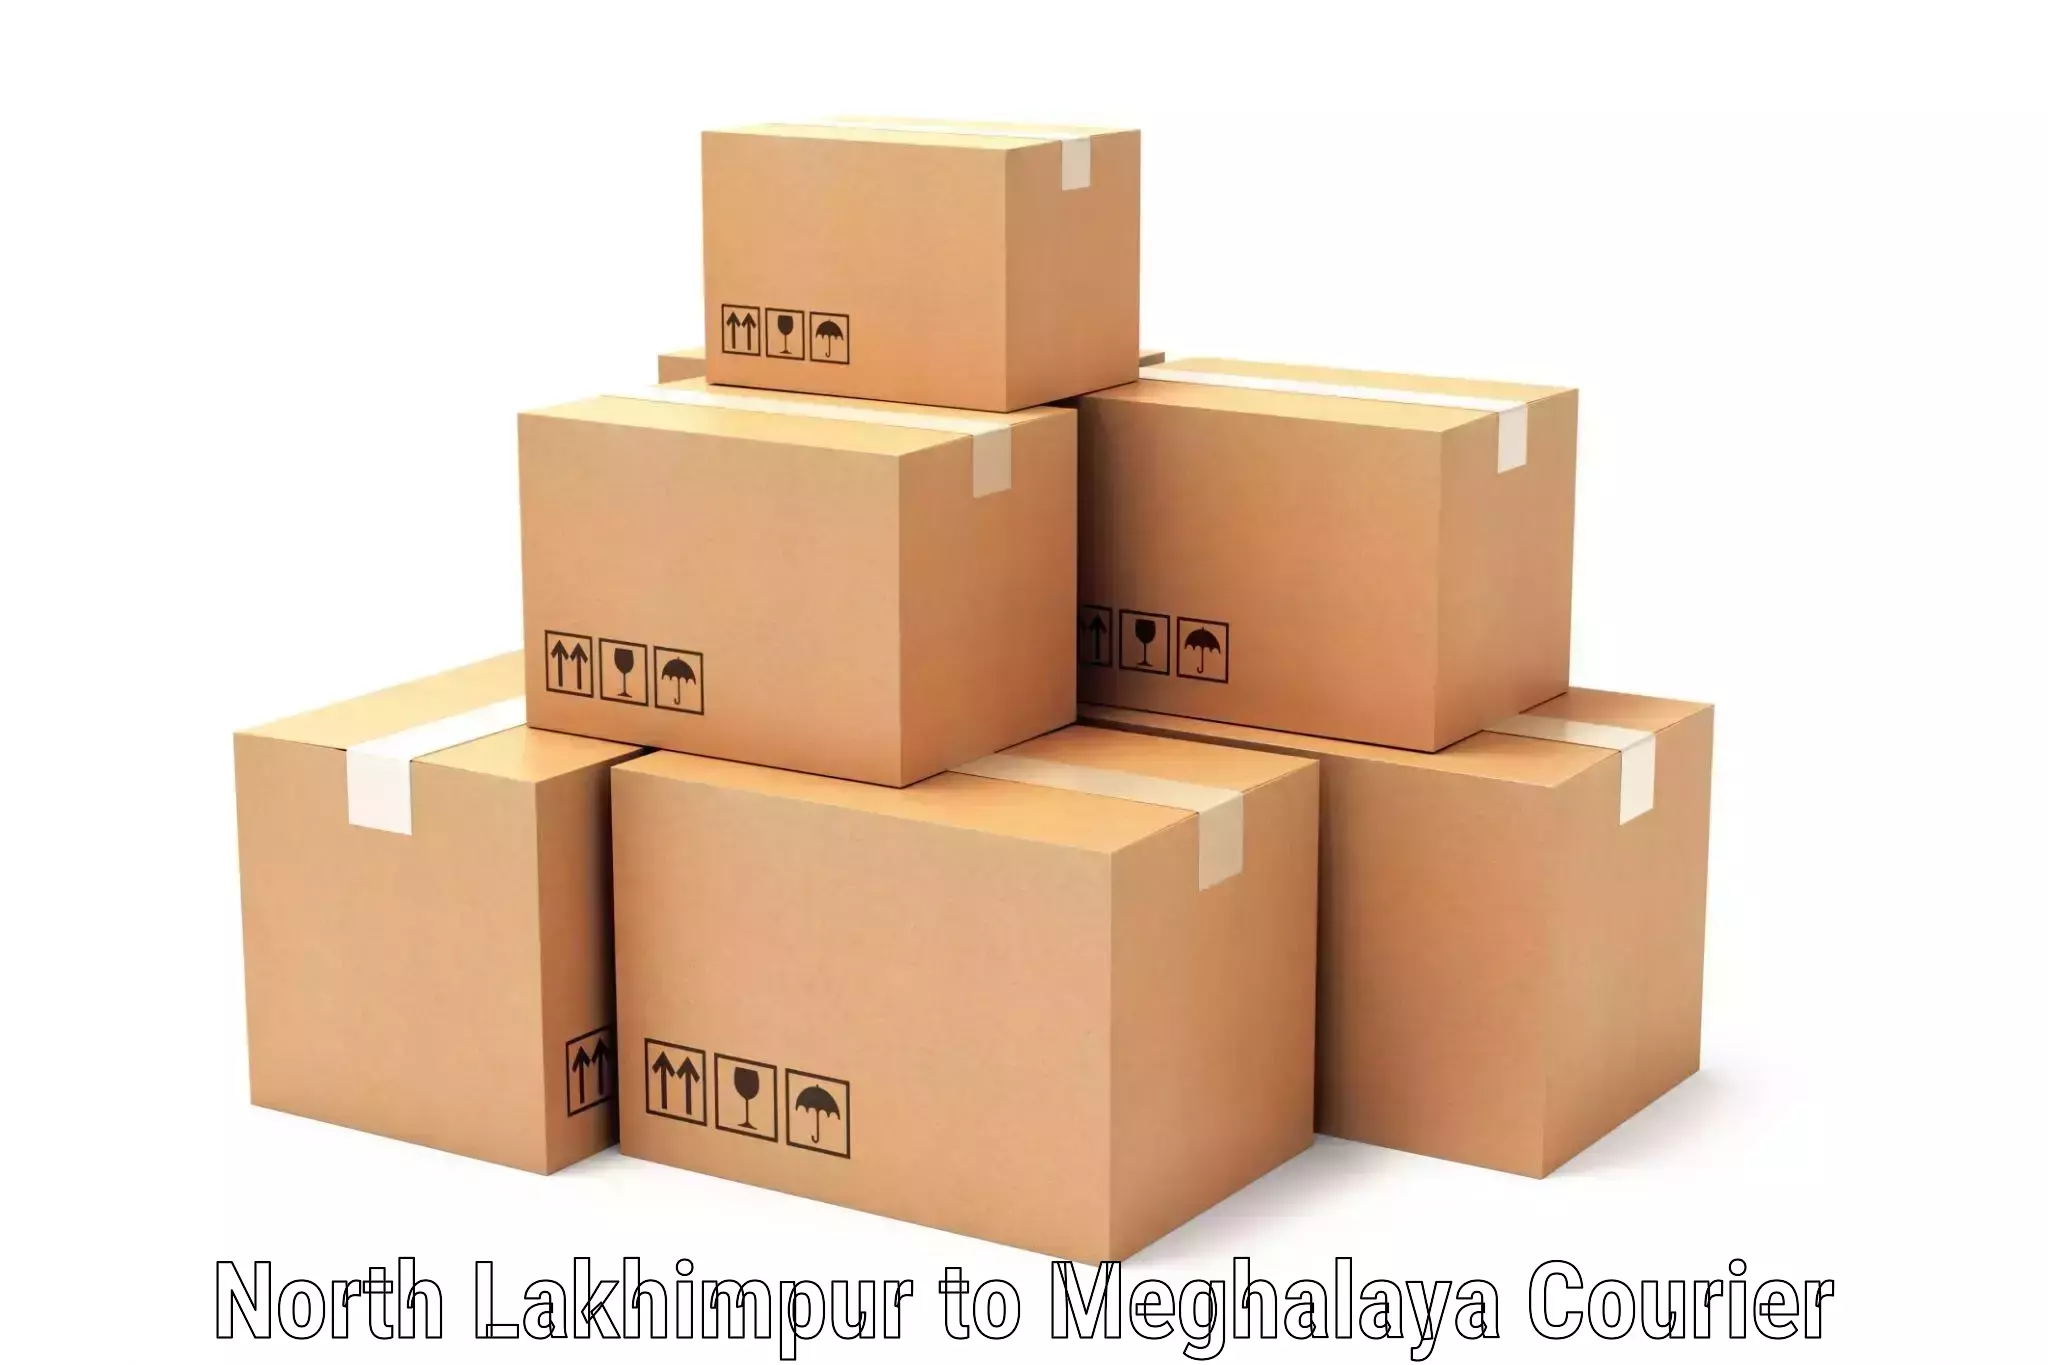 Customized shipping options North Lakhimpur to Umsaw